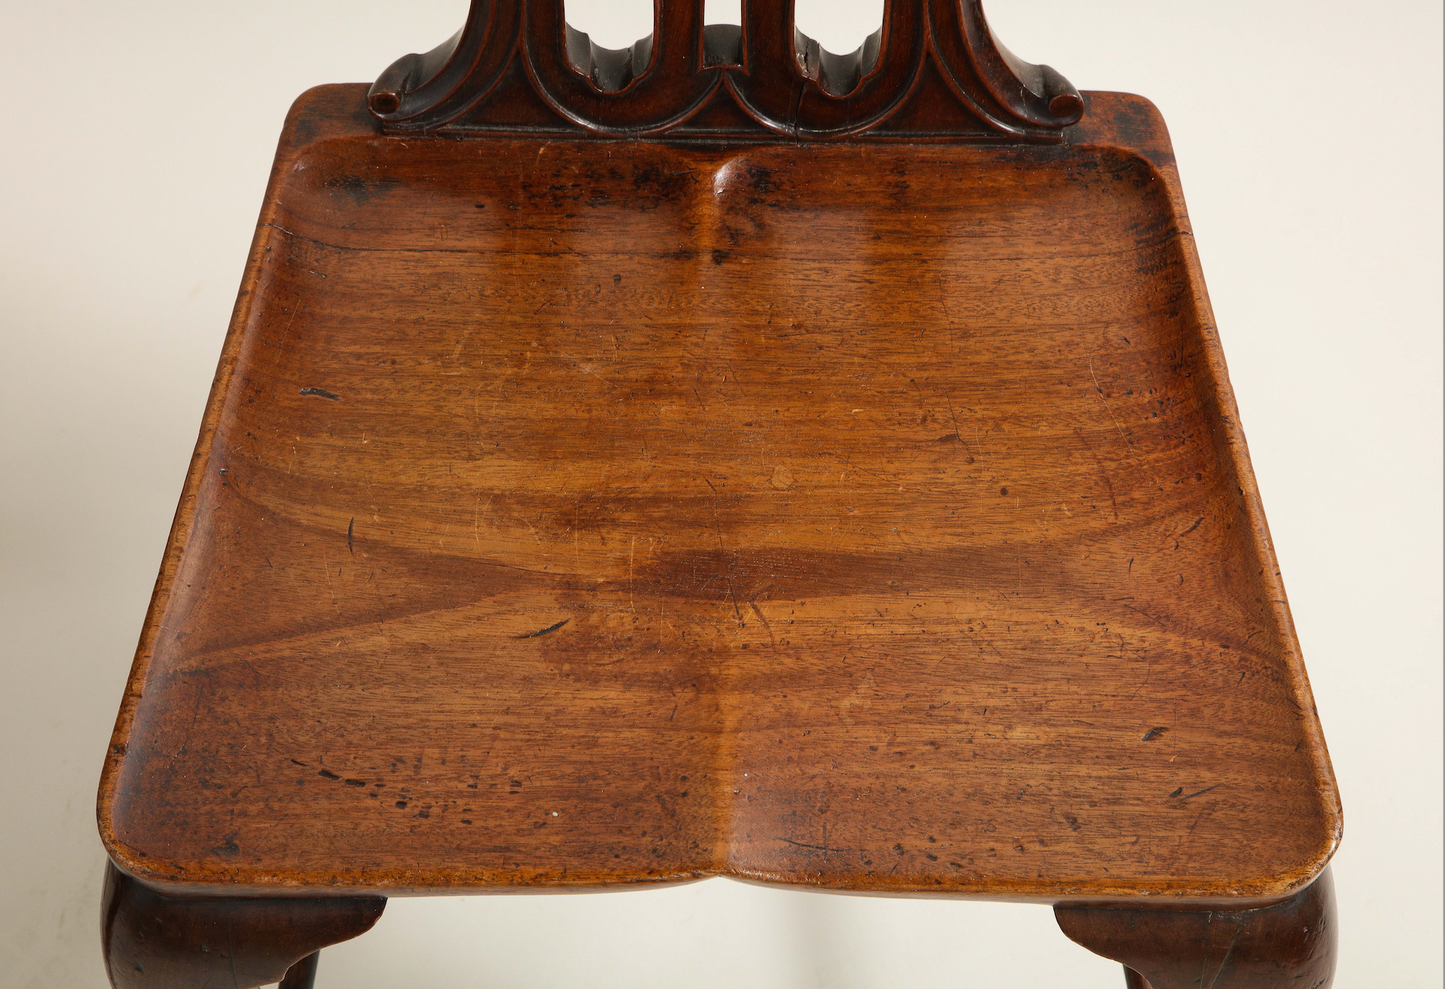 Mahogany Hall Chairs in the Manner of Mayhew and Ince (pair)